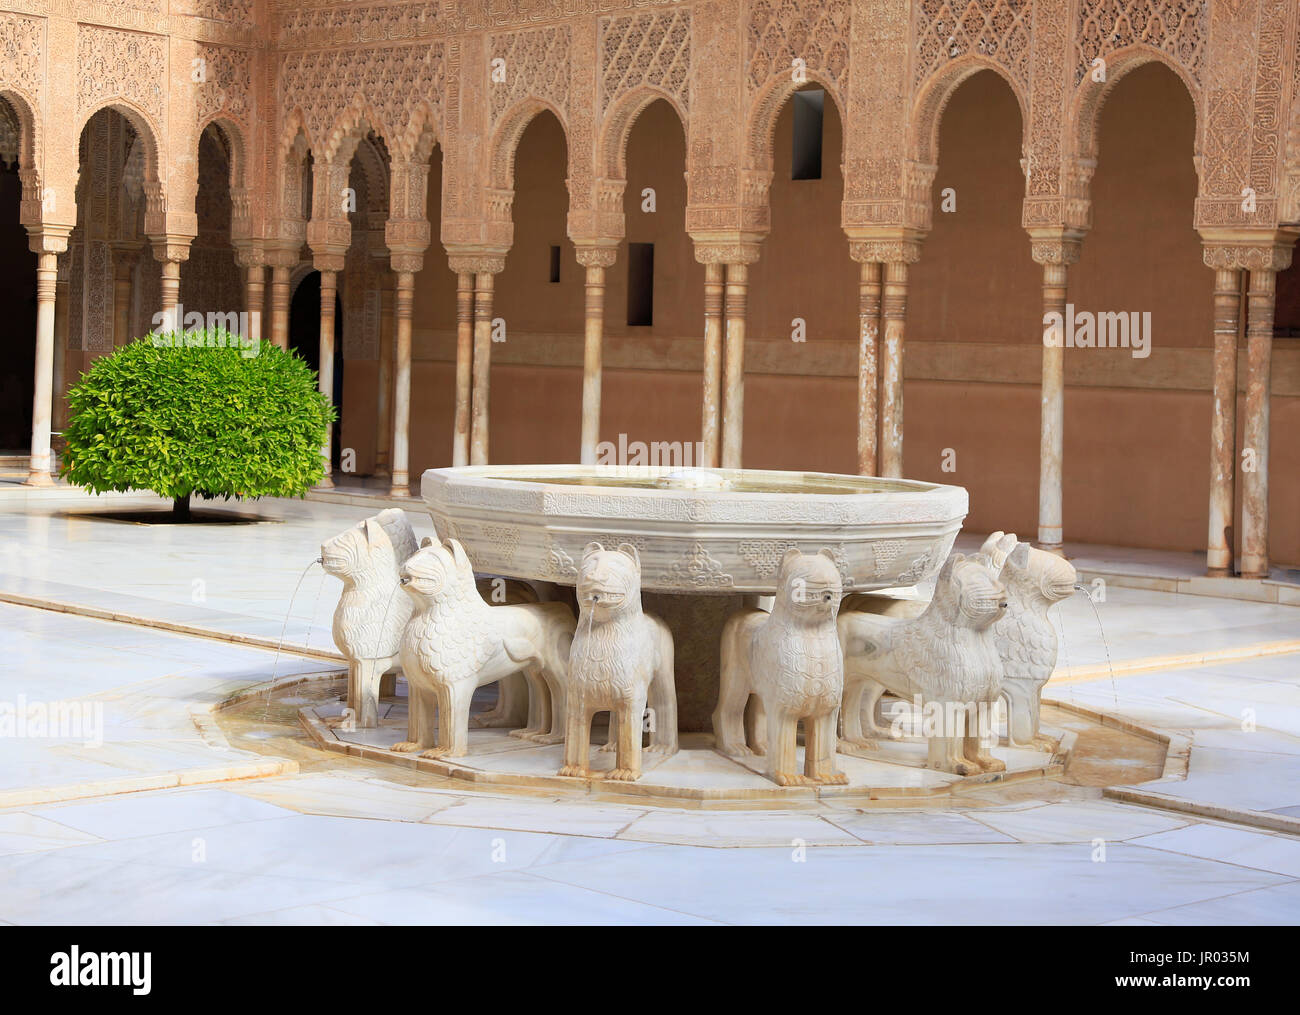 Moorish architecture of the Court of the Lions, the Alhambra, Granada, Andalucia (Andalusia), Spain, Europe. Stock Photo